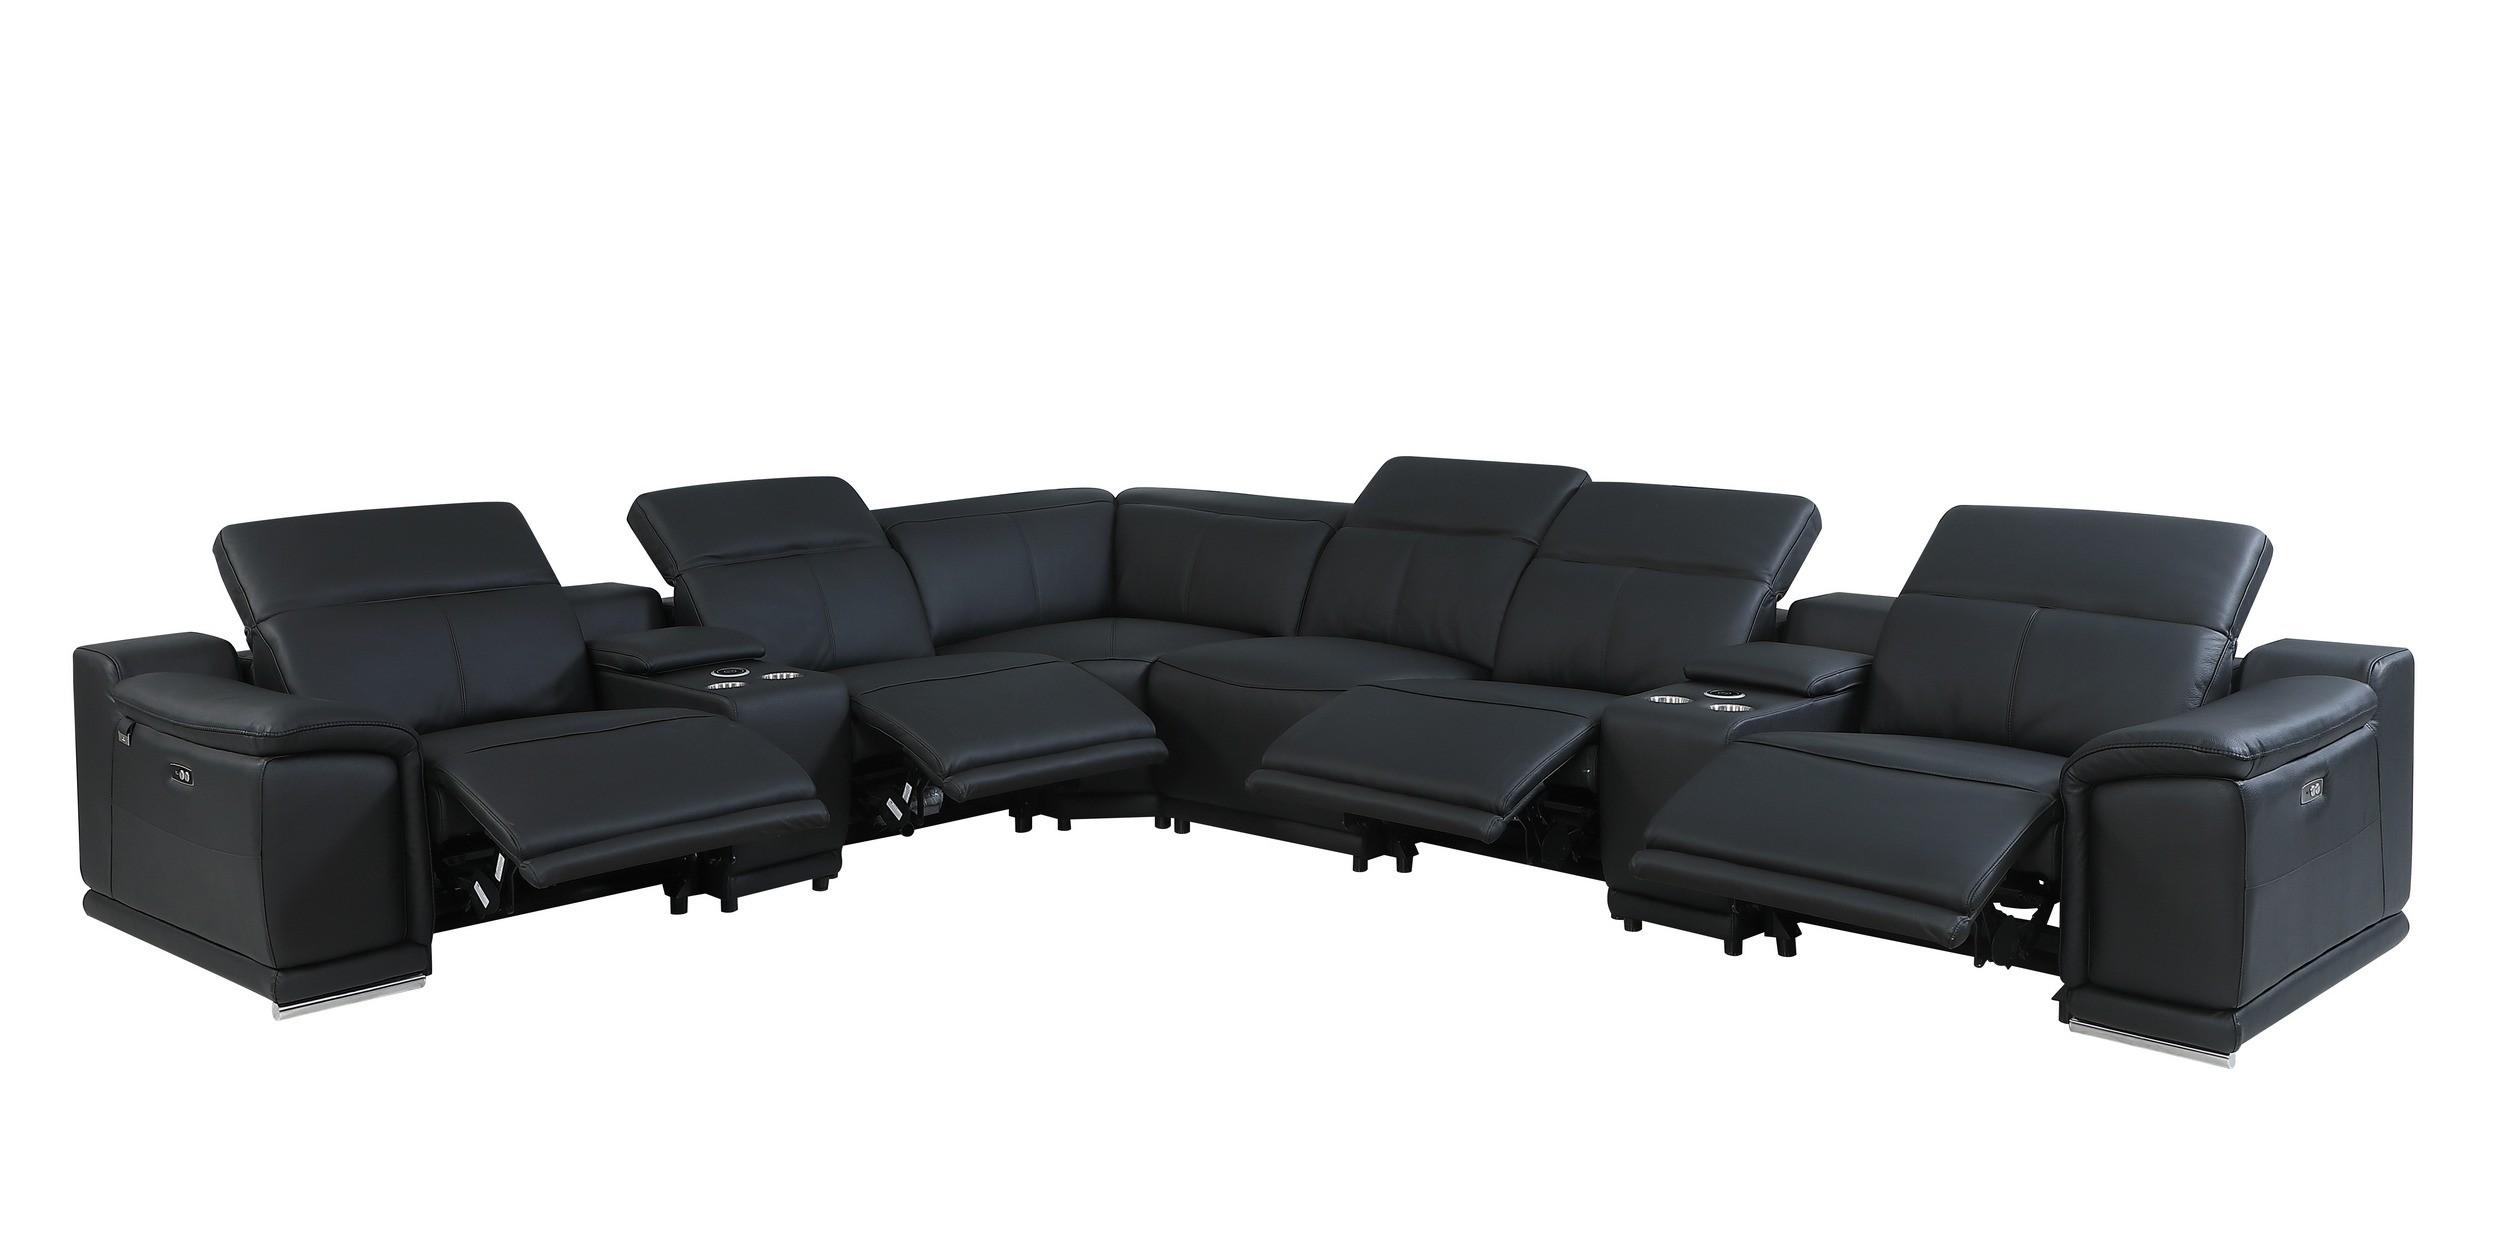 

    
BLACK 4-Power Reclining 8PC Sectional /w 2-Consoles 9762 Global United
